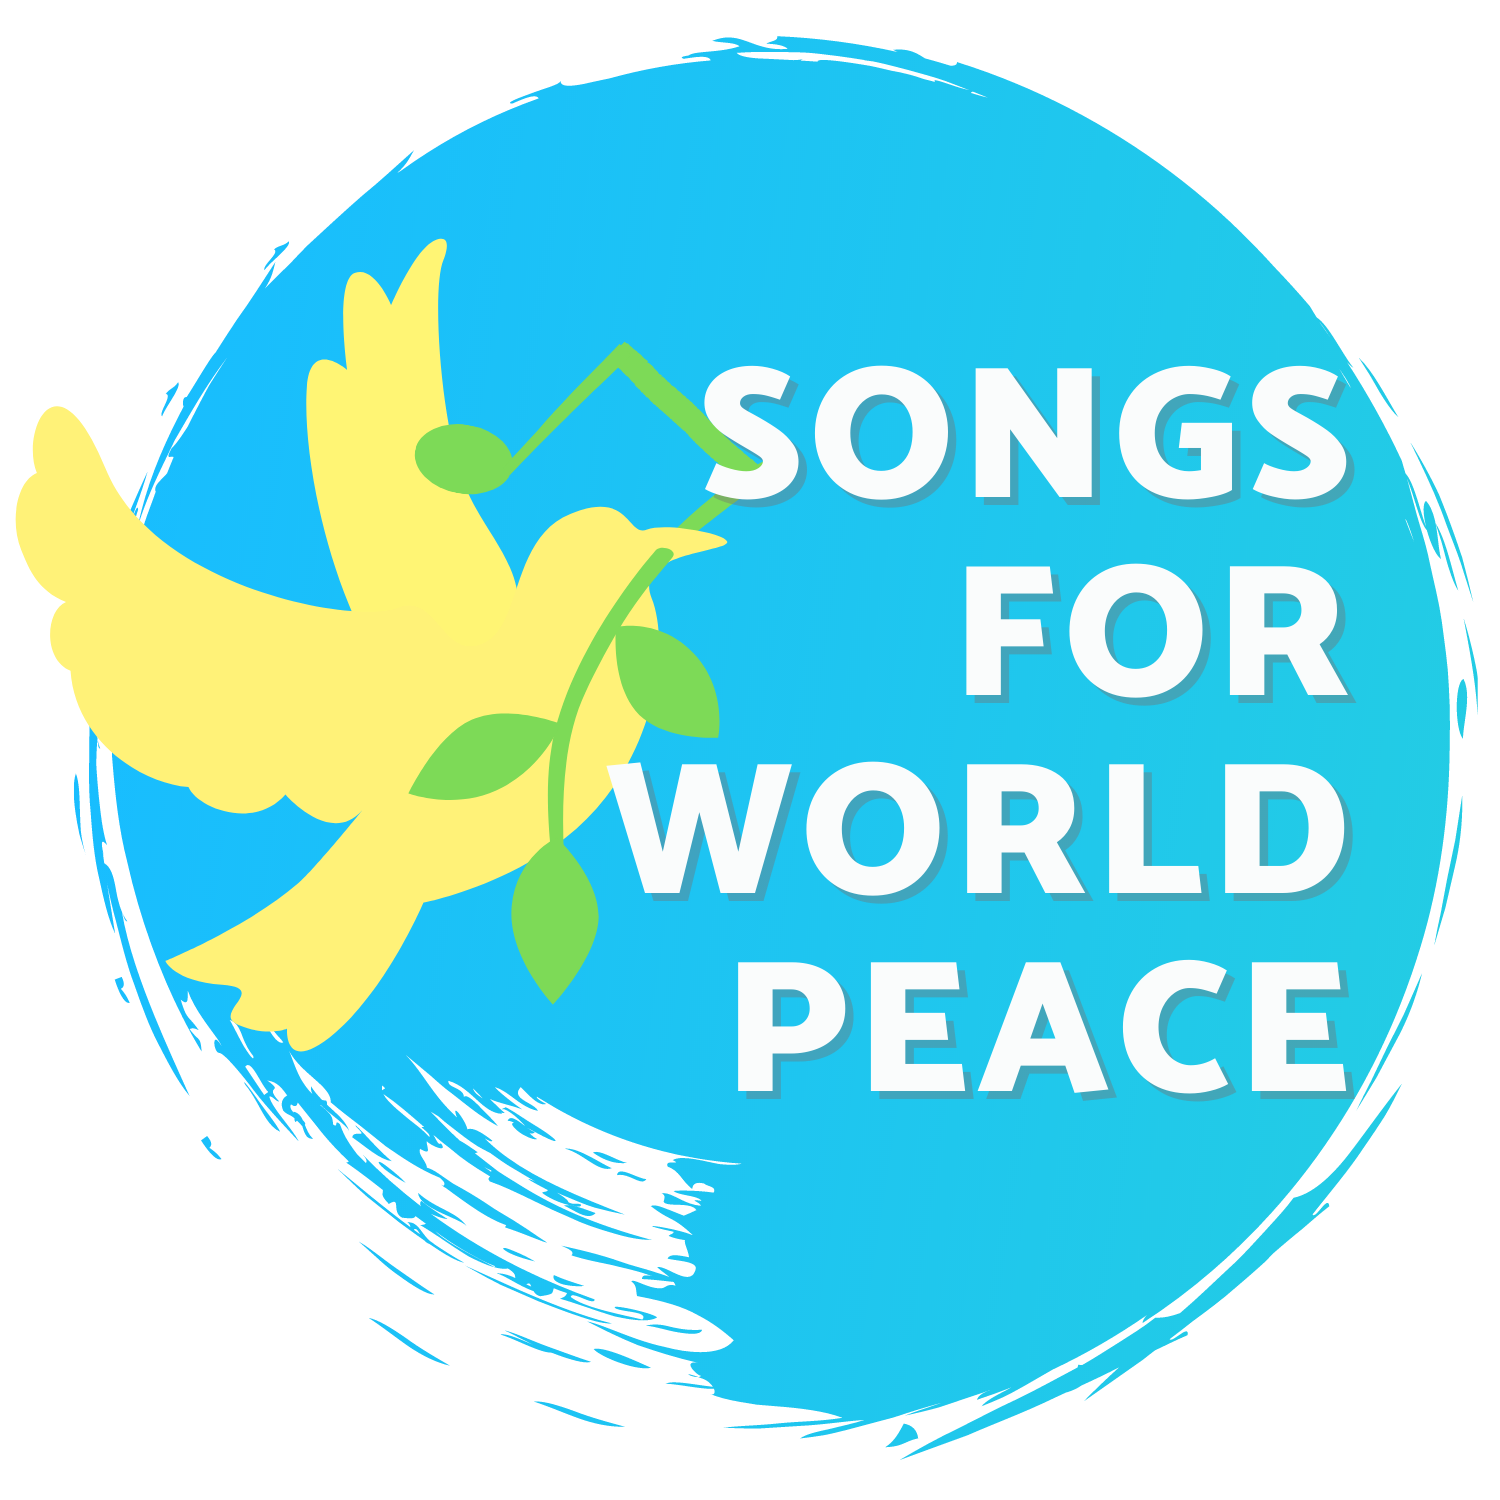 Songs for World Peace Premieres 60+ Songs by 70+ Artists from 60+ Countries in Celebration of International Day of Peace